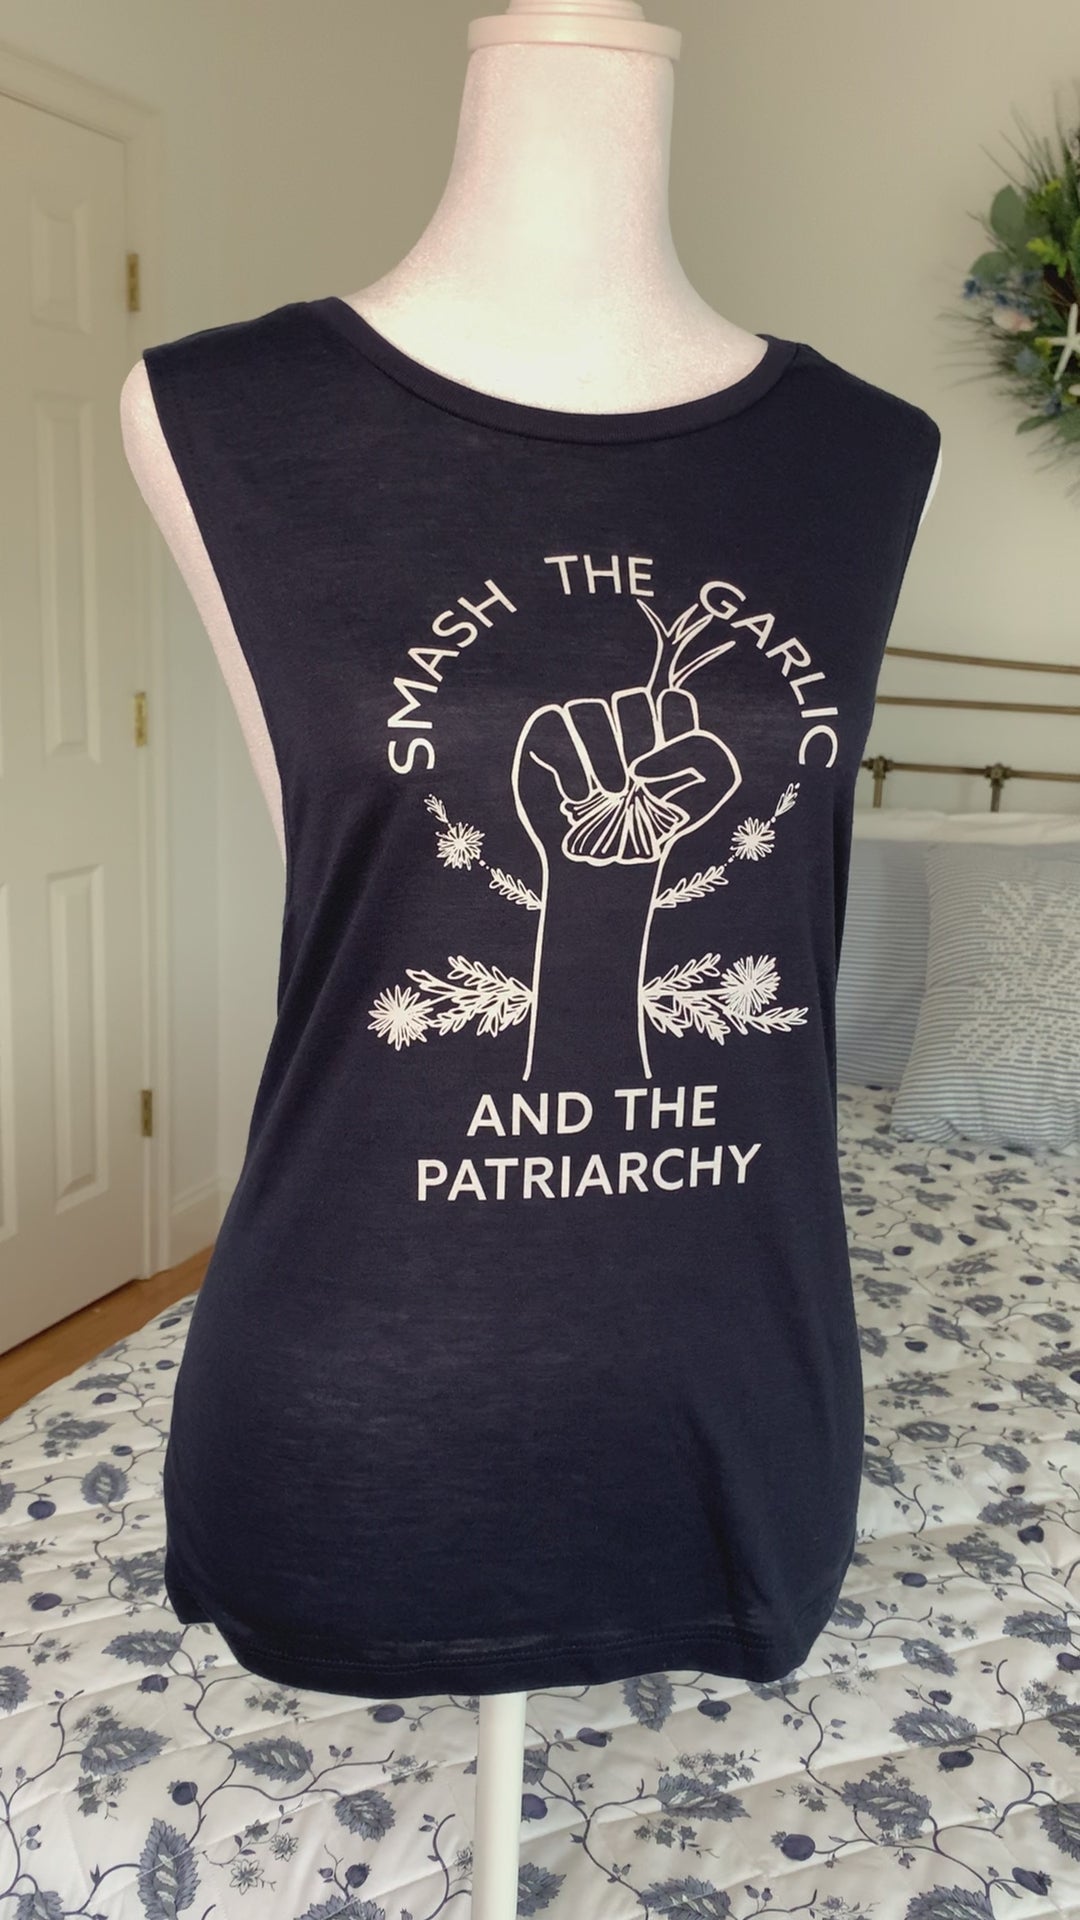 A navy tank with the words "Smash the Garlic and the Patriarchy" and a garlic illustration hangs on a manikin